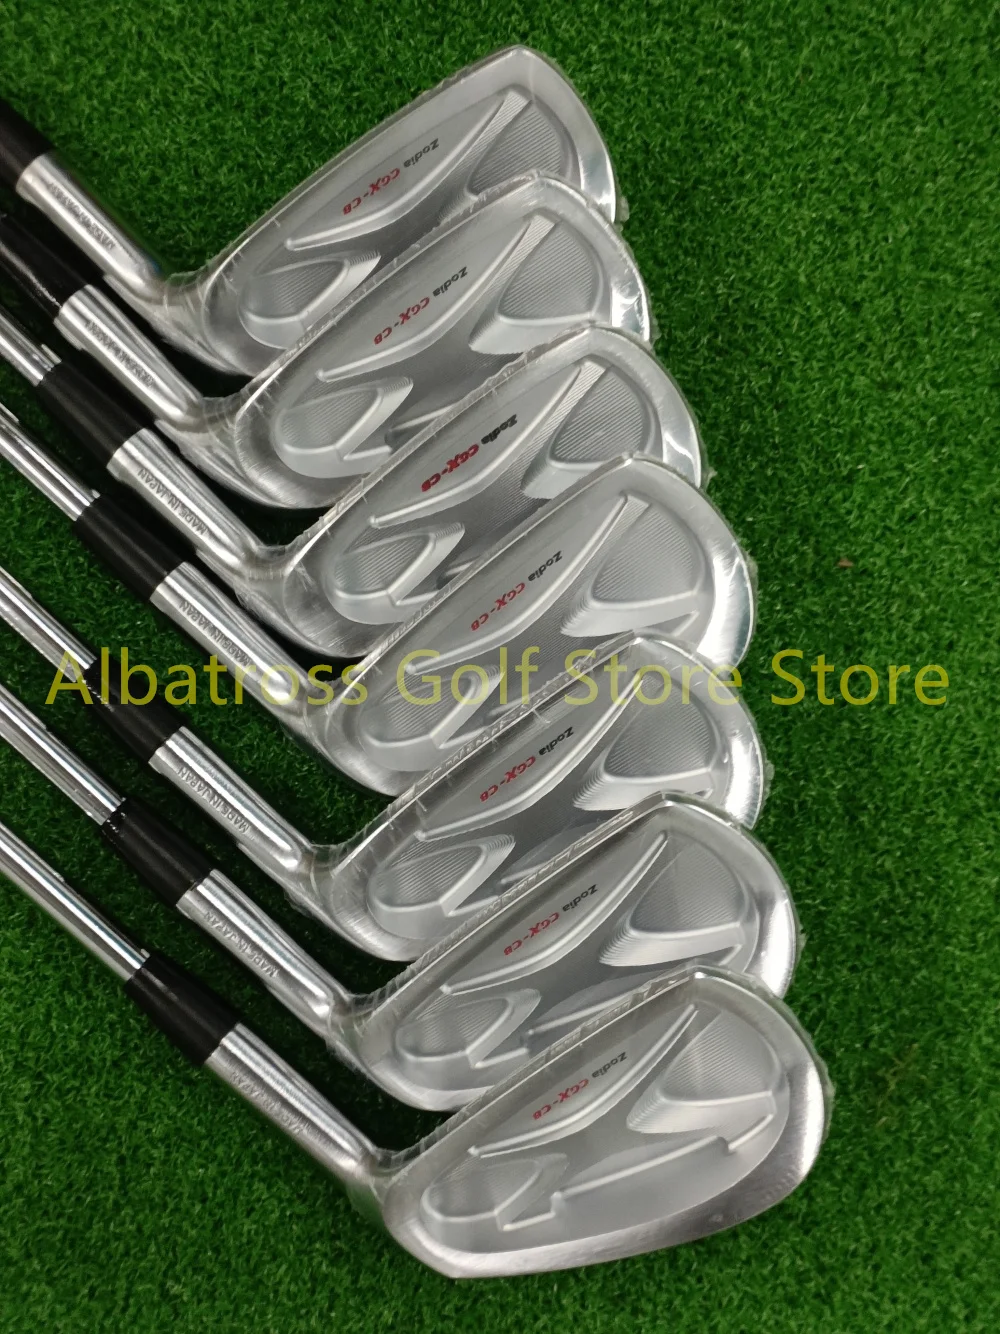 

2023 New OEM Golf Irons Limited Zodia CGX-CB Irons Forged Set 4 5 6 7 8 9 P With Steel Shaft 7pcs Golf Clubs